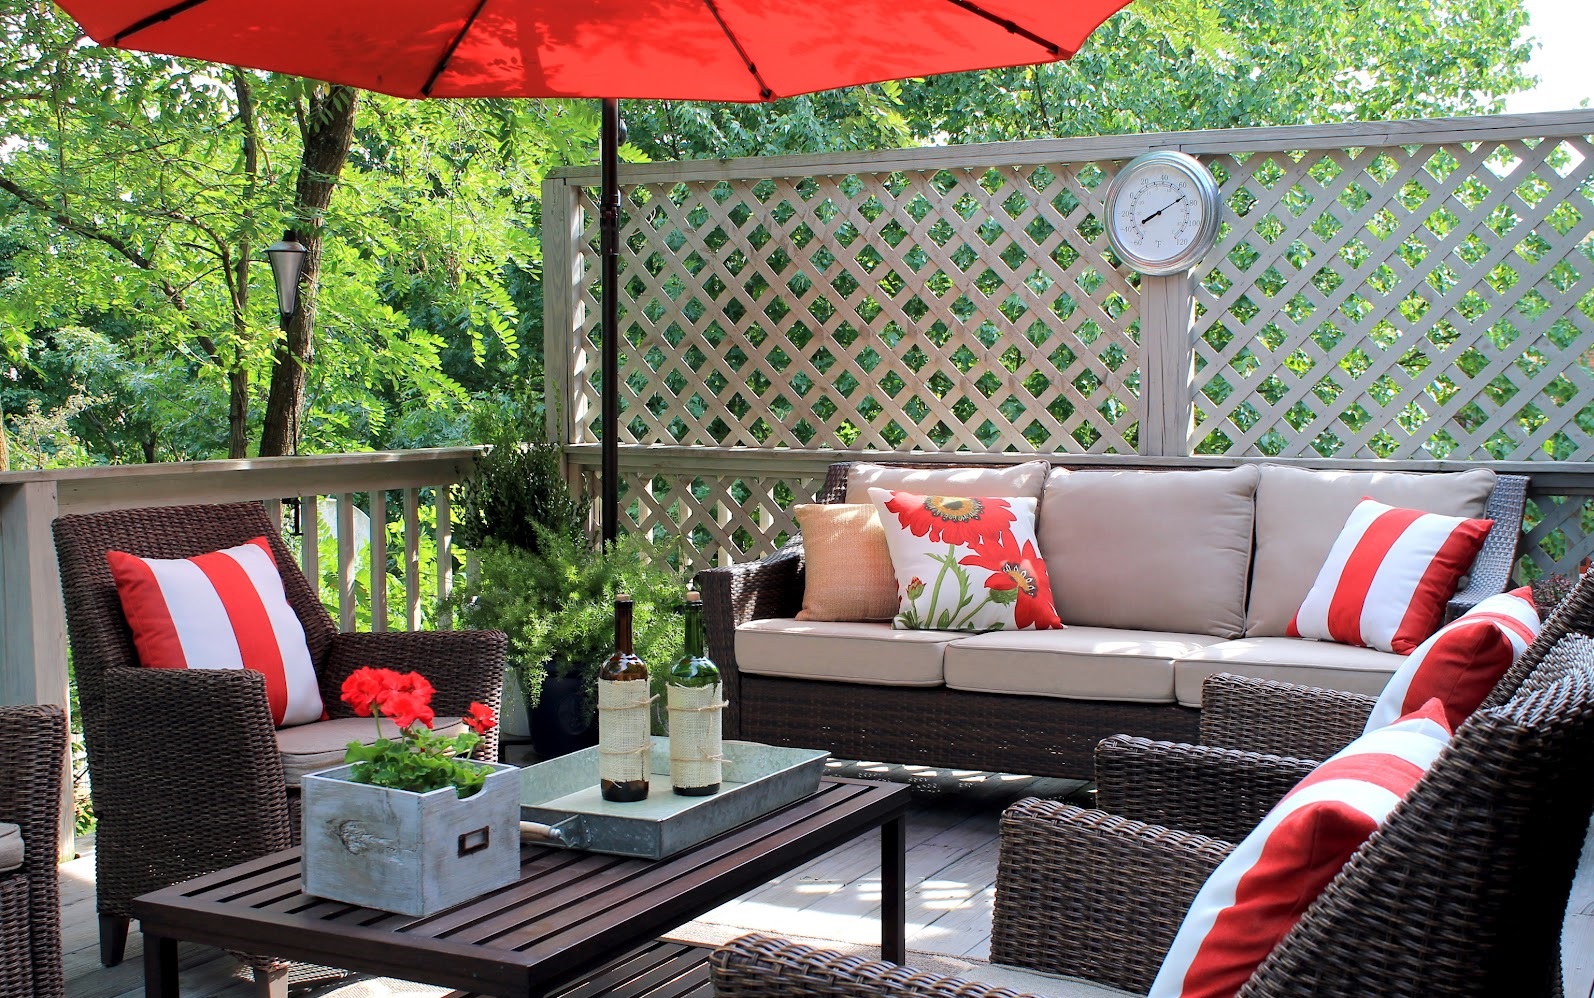 Living Space With Amazing Living Space Design Finished With Black Color Equipped With Red Parasol Design Idea Wooden Table Outdoor  Pottery Barn Outdoor Furniture Equipping Breezy Patio 